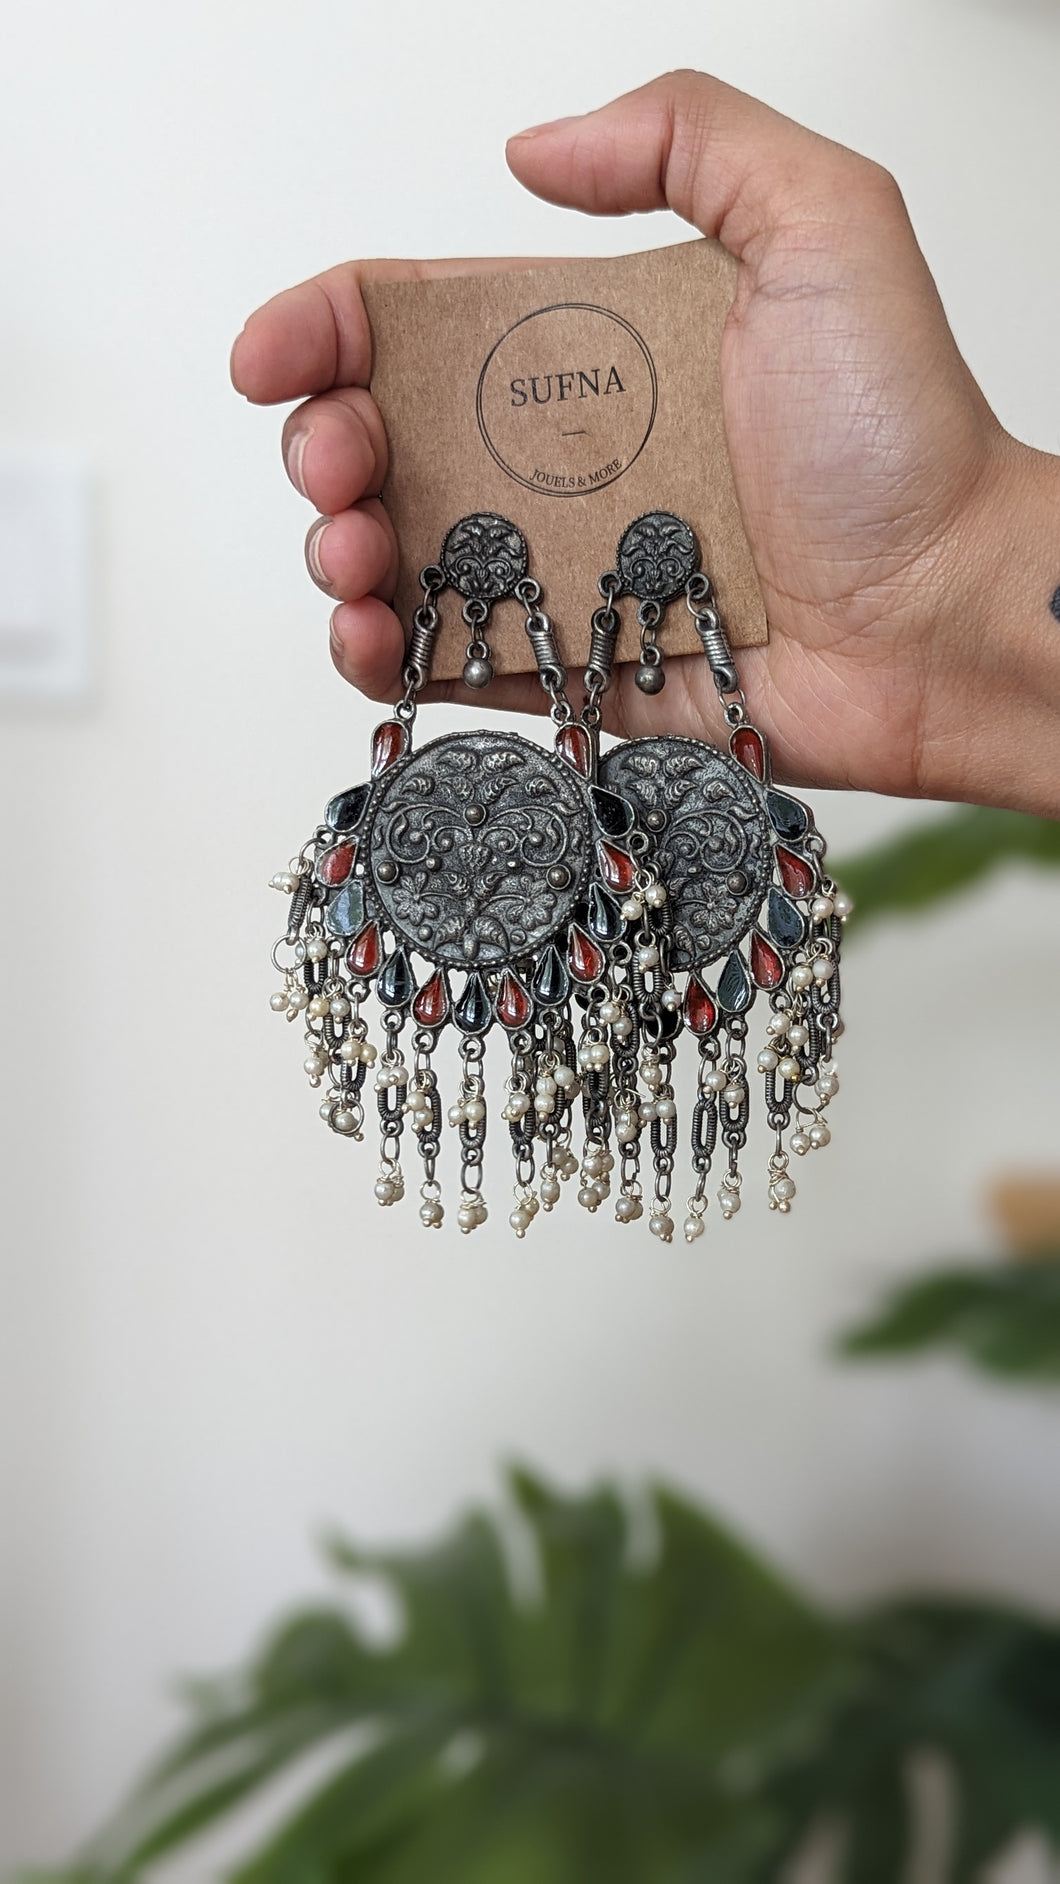 Afghani earrings in dark oxidized color with red and blue stones.